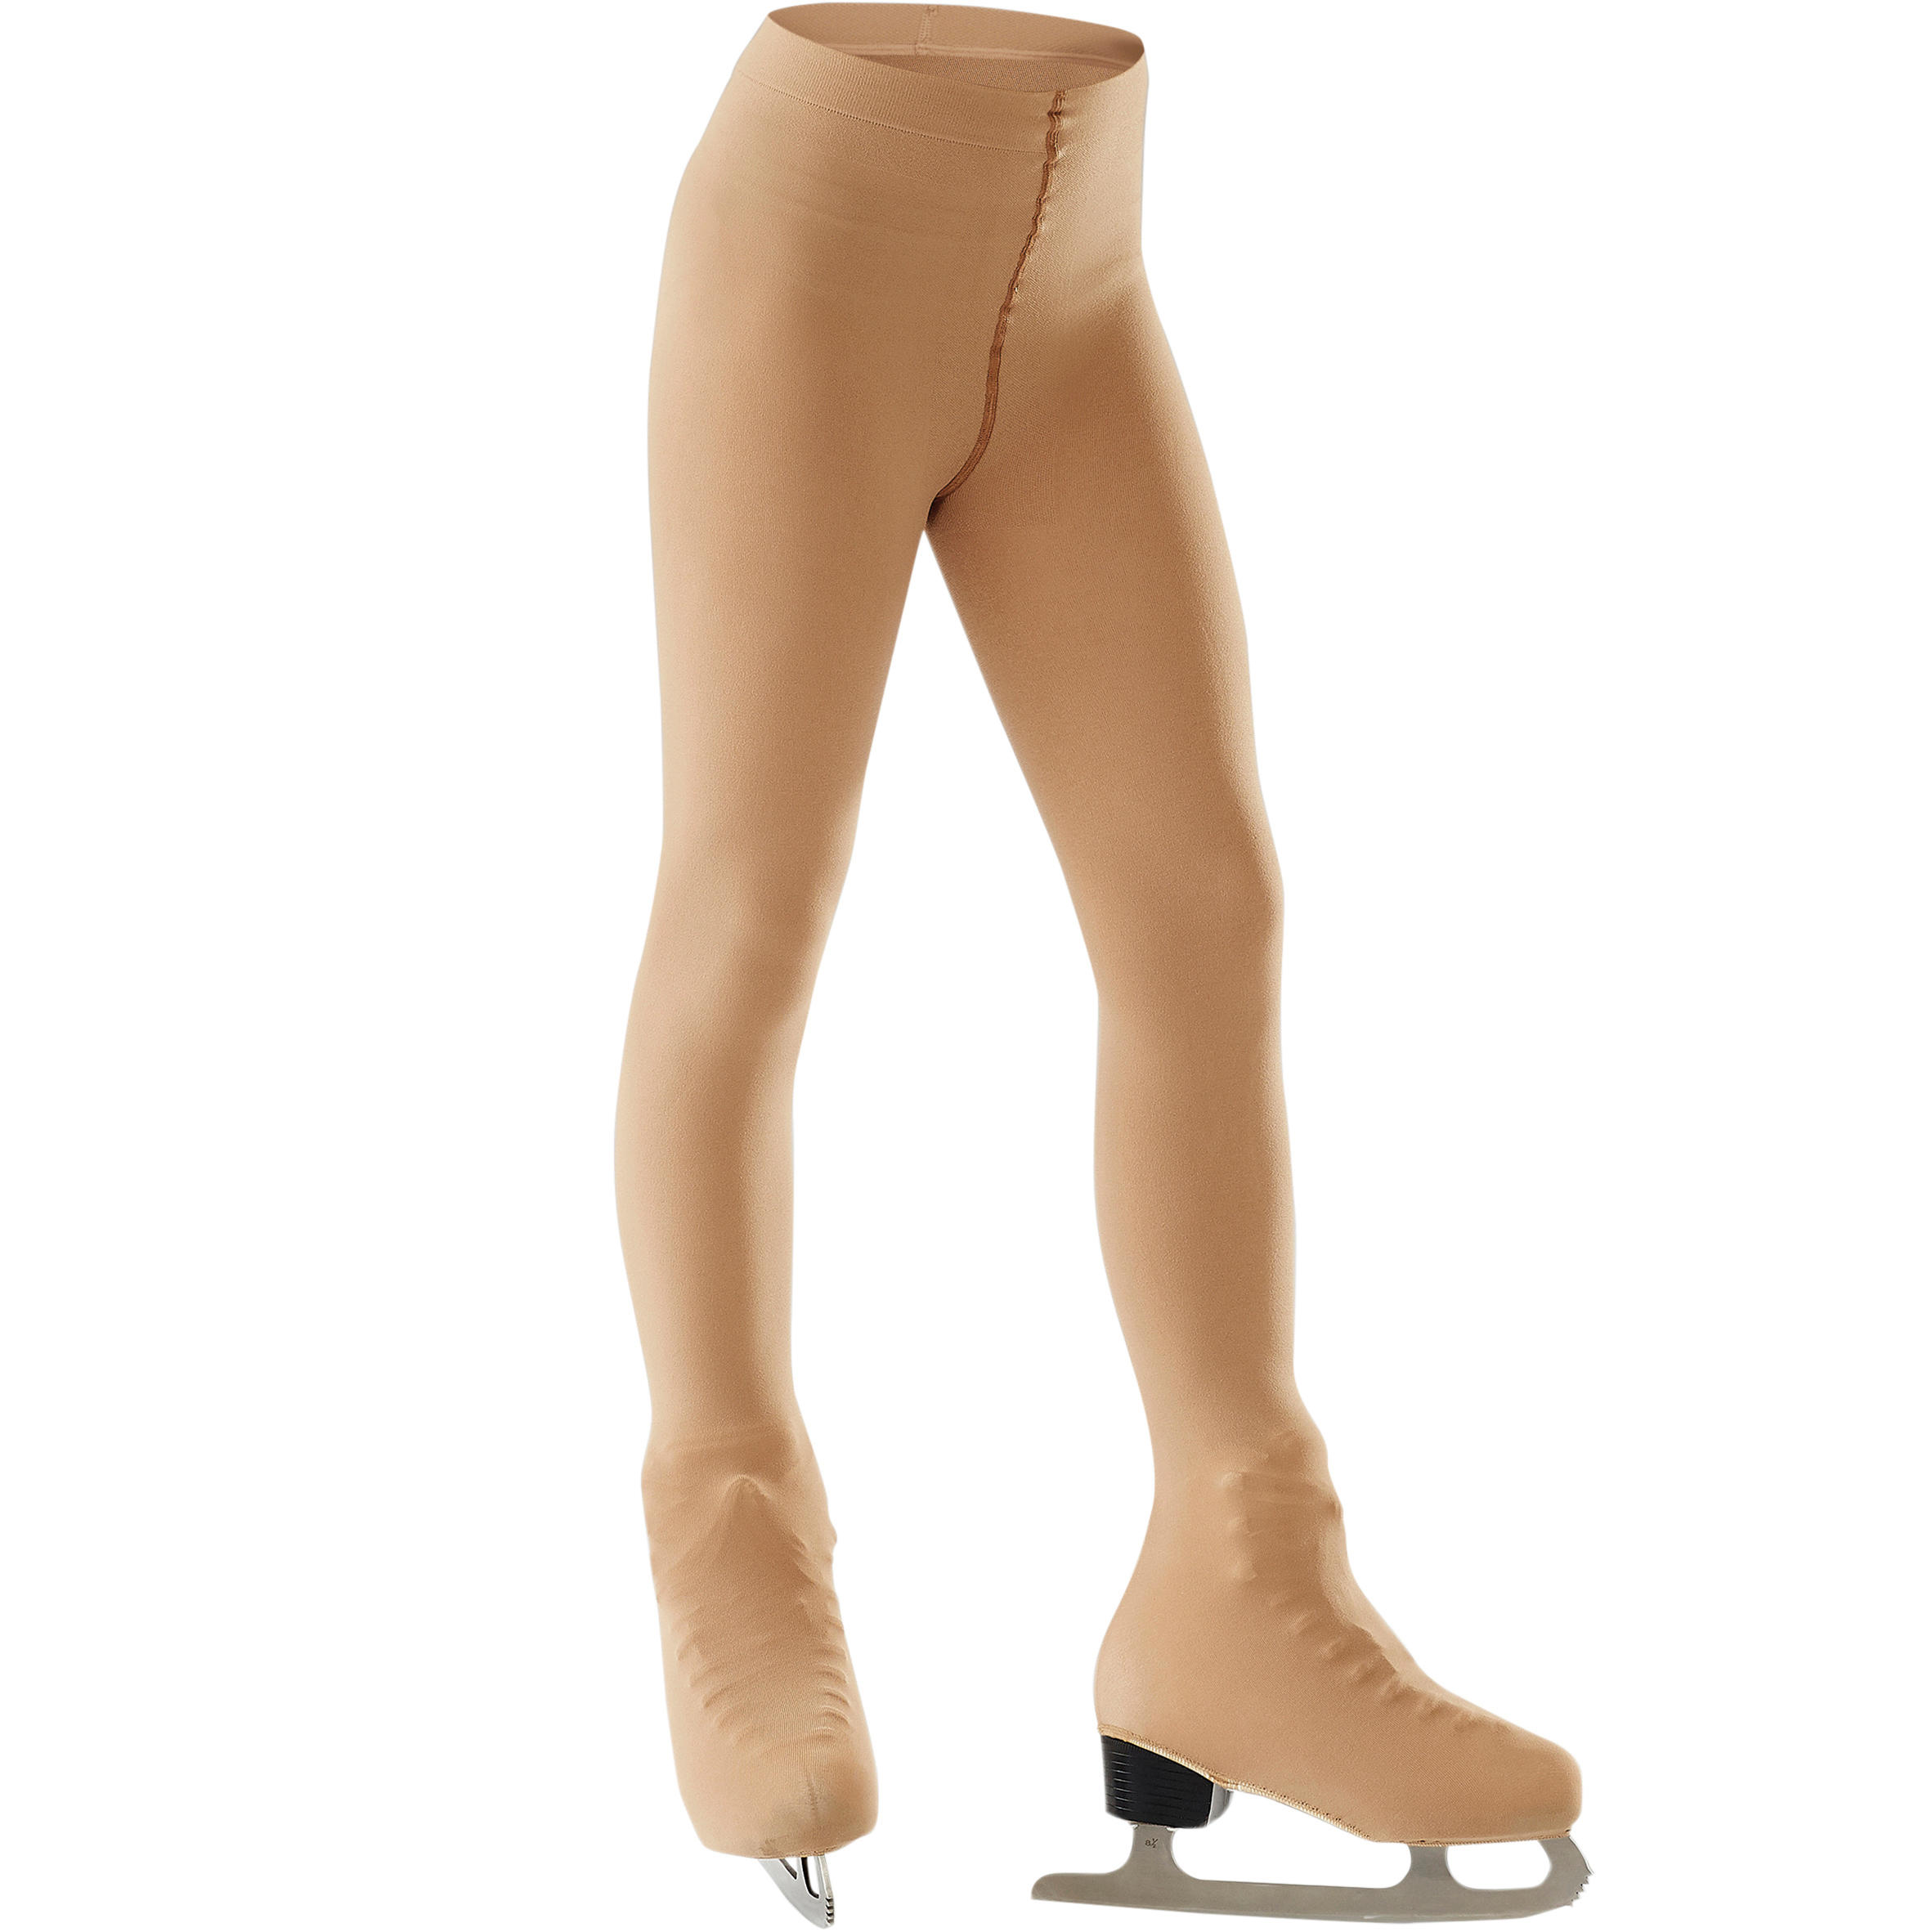 AXELYS Kids' Overboot Figure Skating Tights